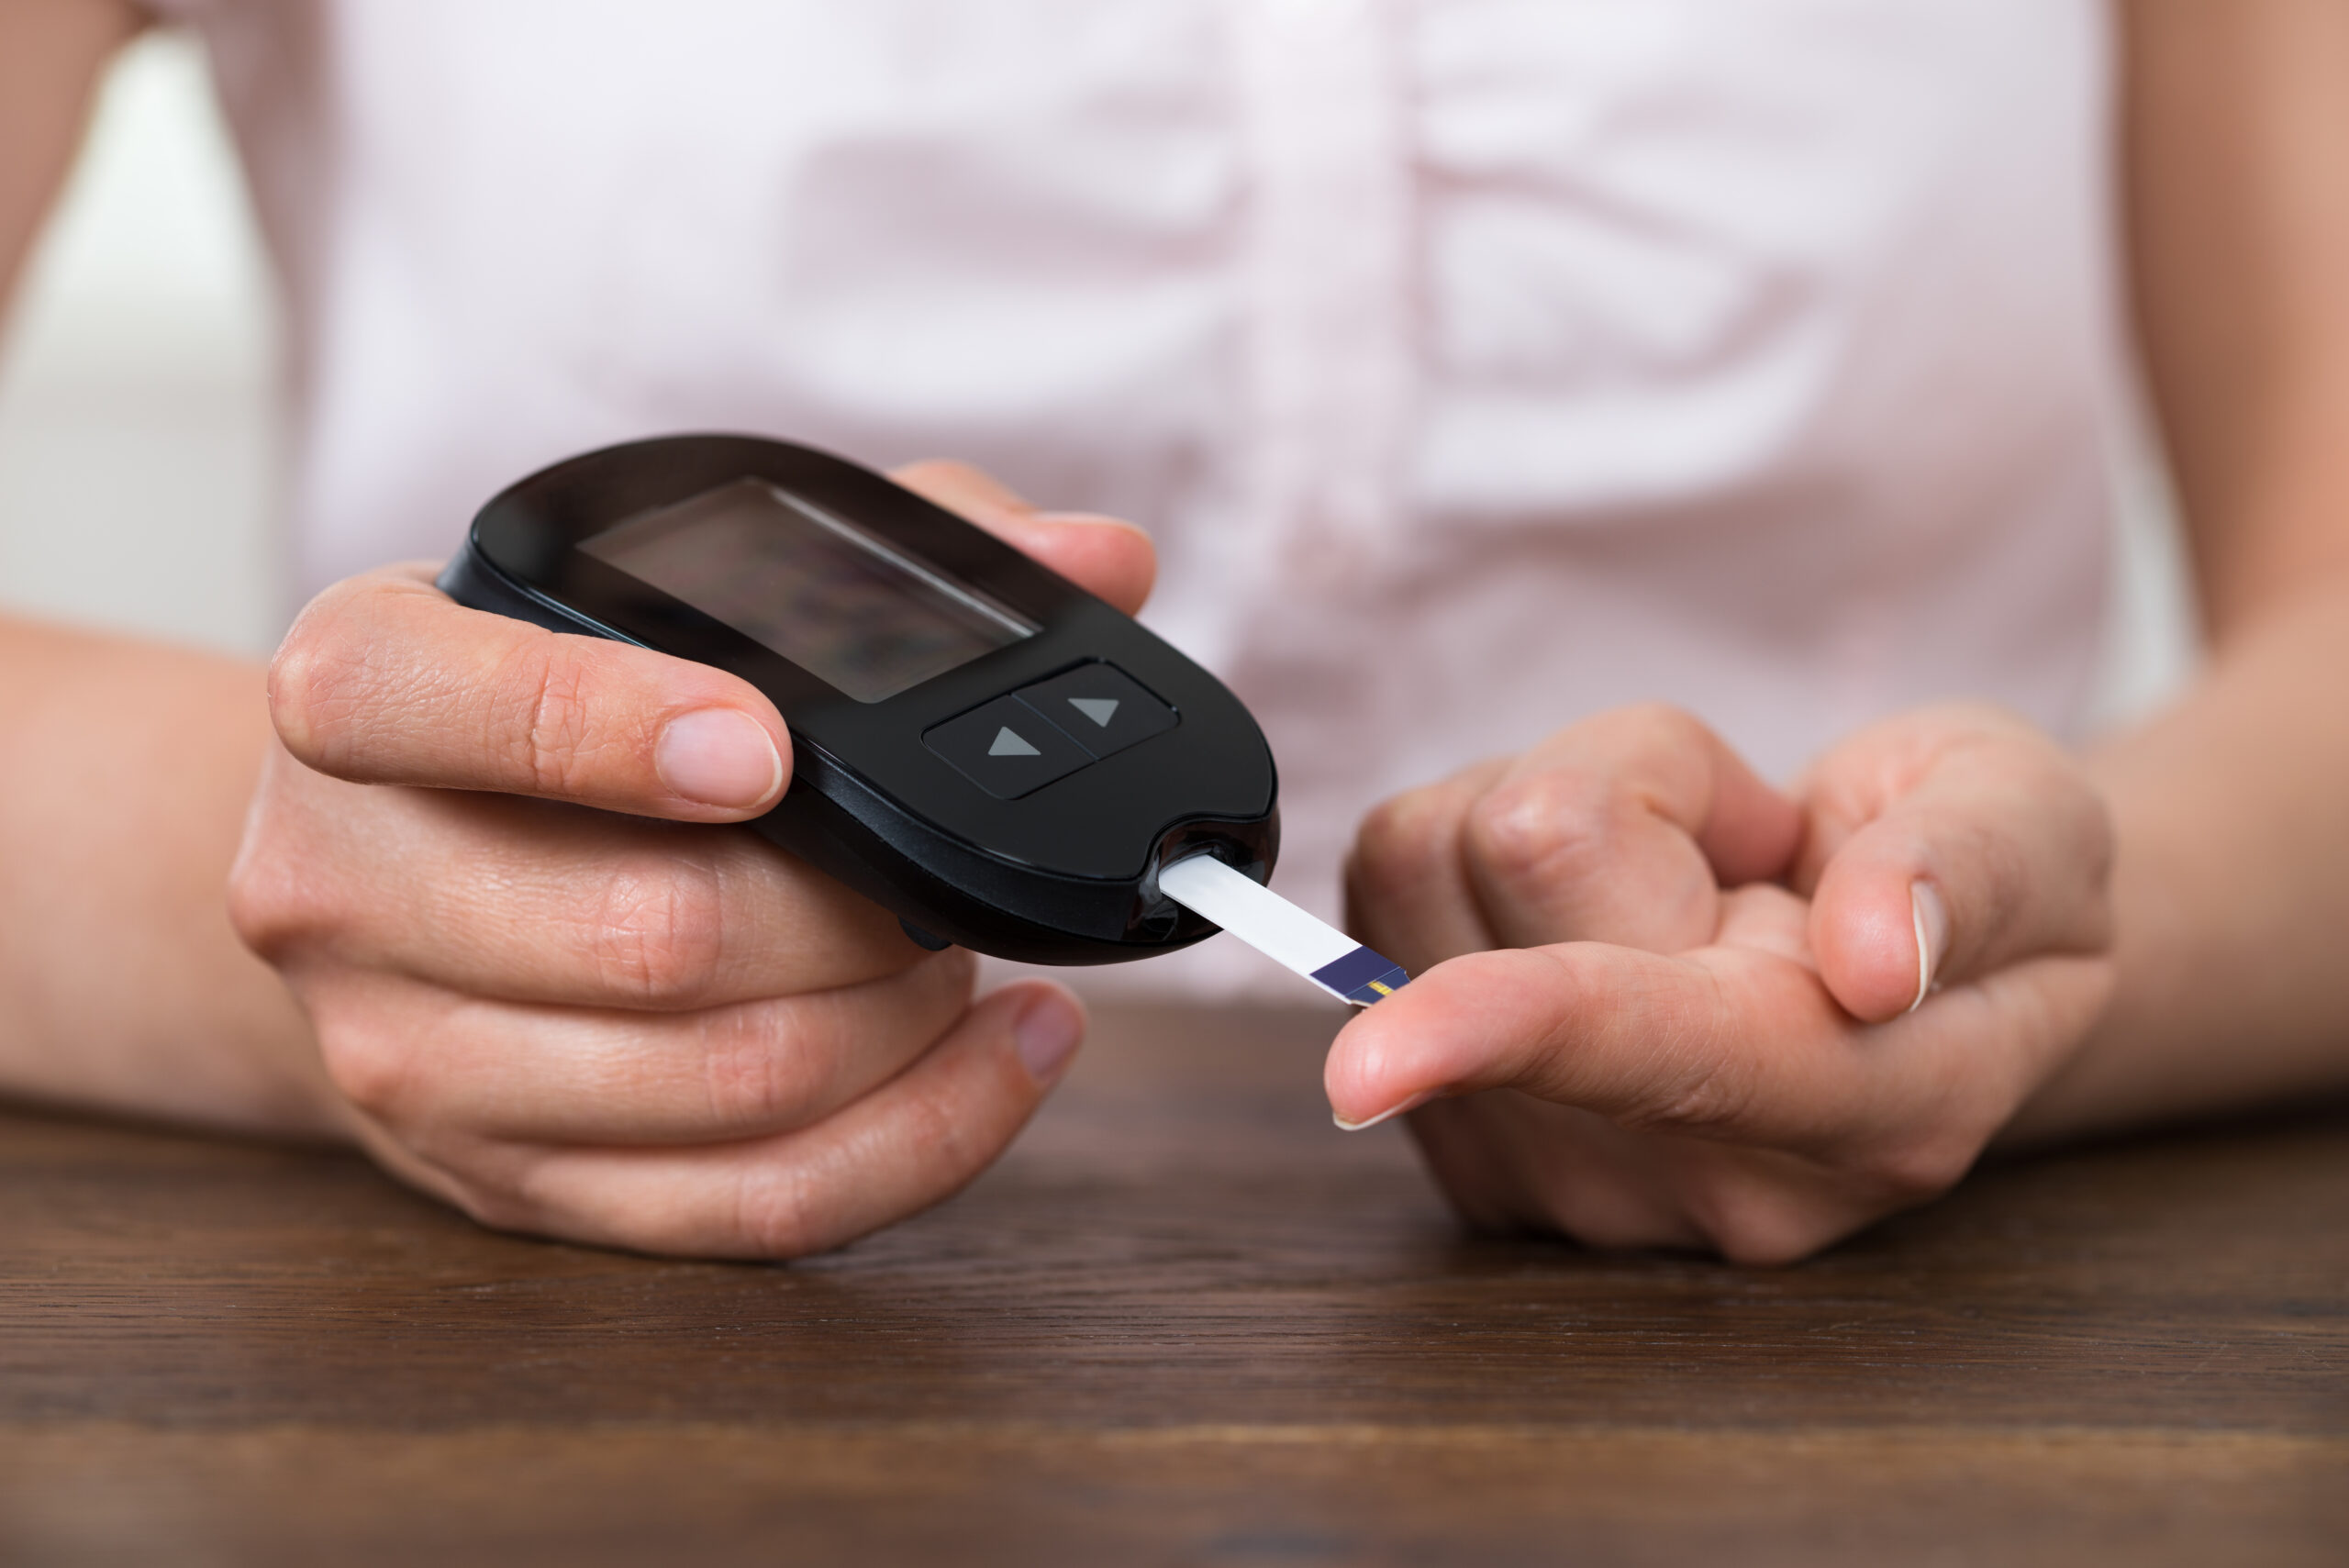 Diabetes Alert Day: Are You At Risk for Type 2 Diabetes?